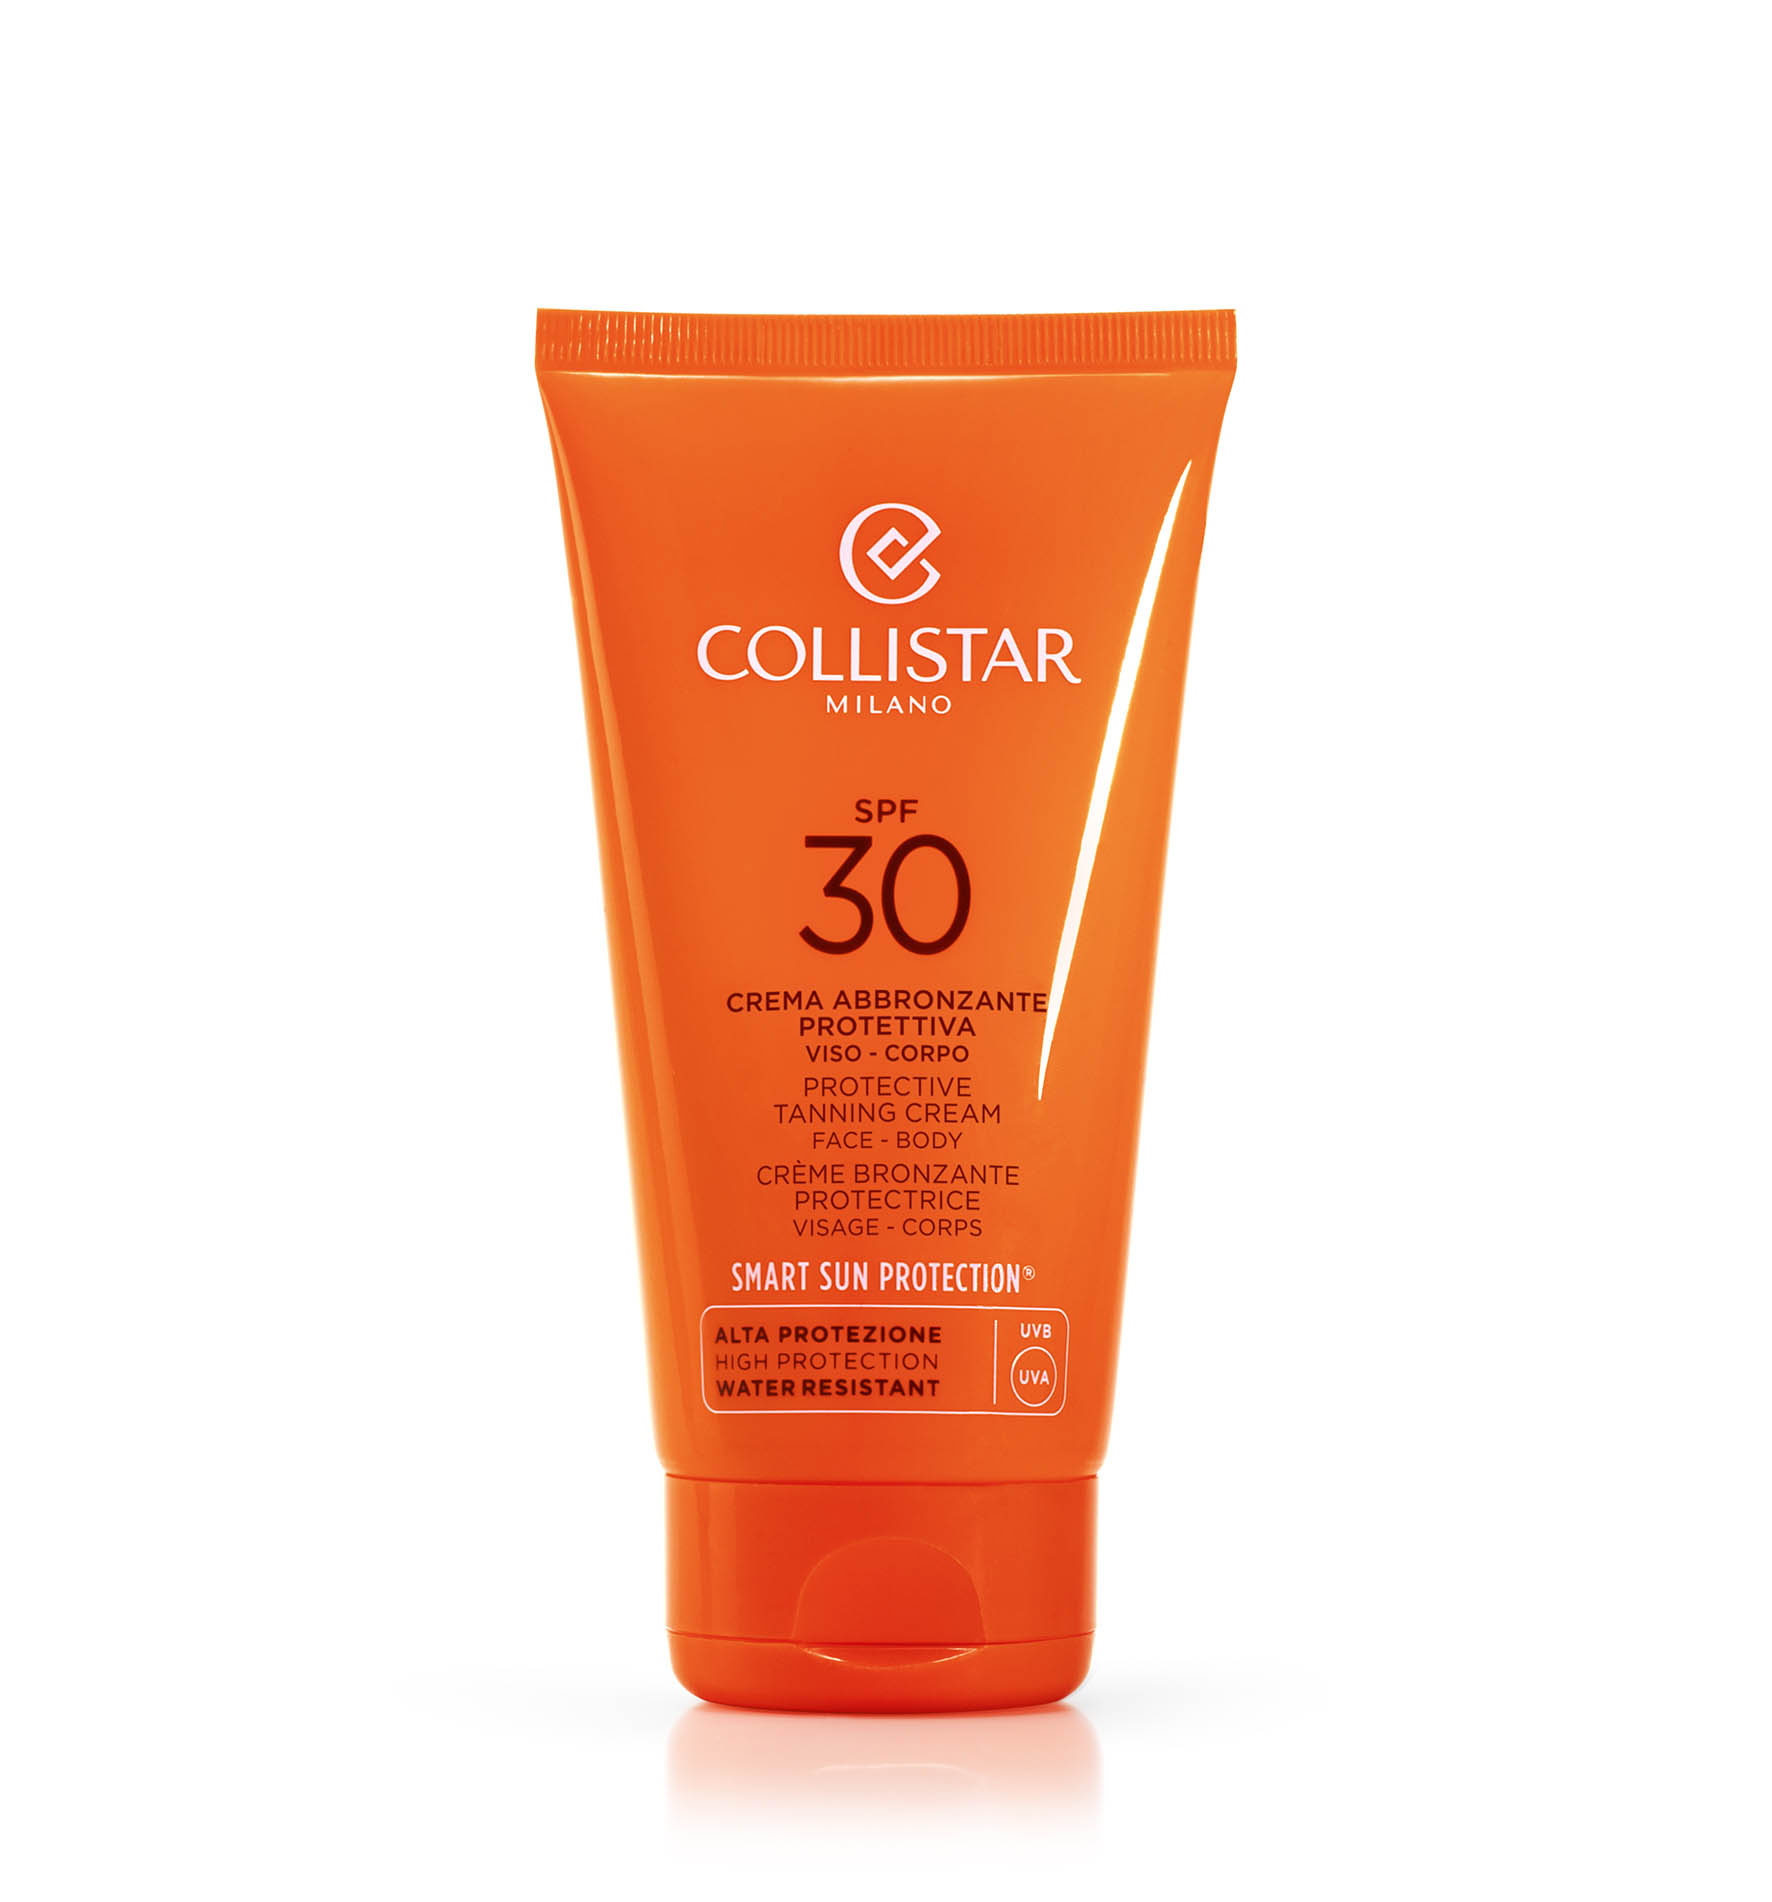 ULTRA PROTECTION TANNING CREAM FACE - BODY SPF 30 - Face | Collistar - Shop Online Ufficiale